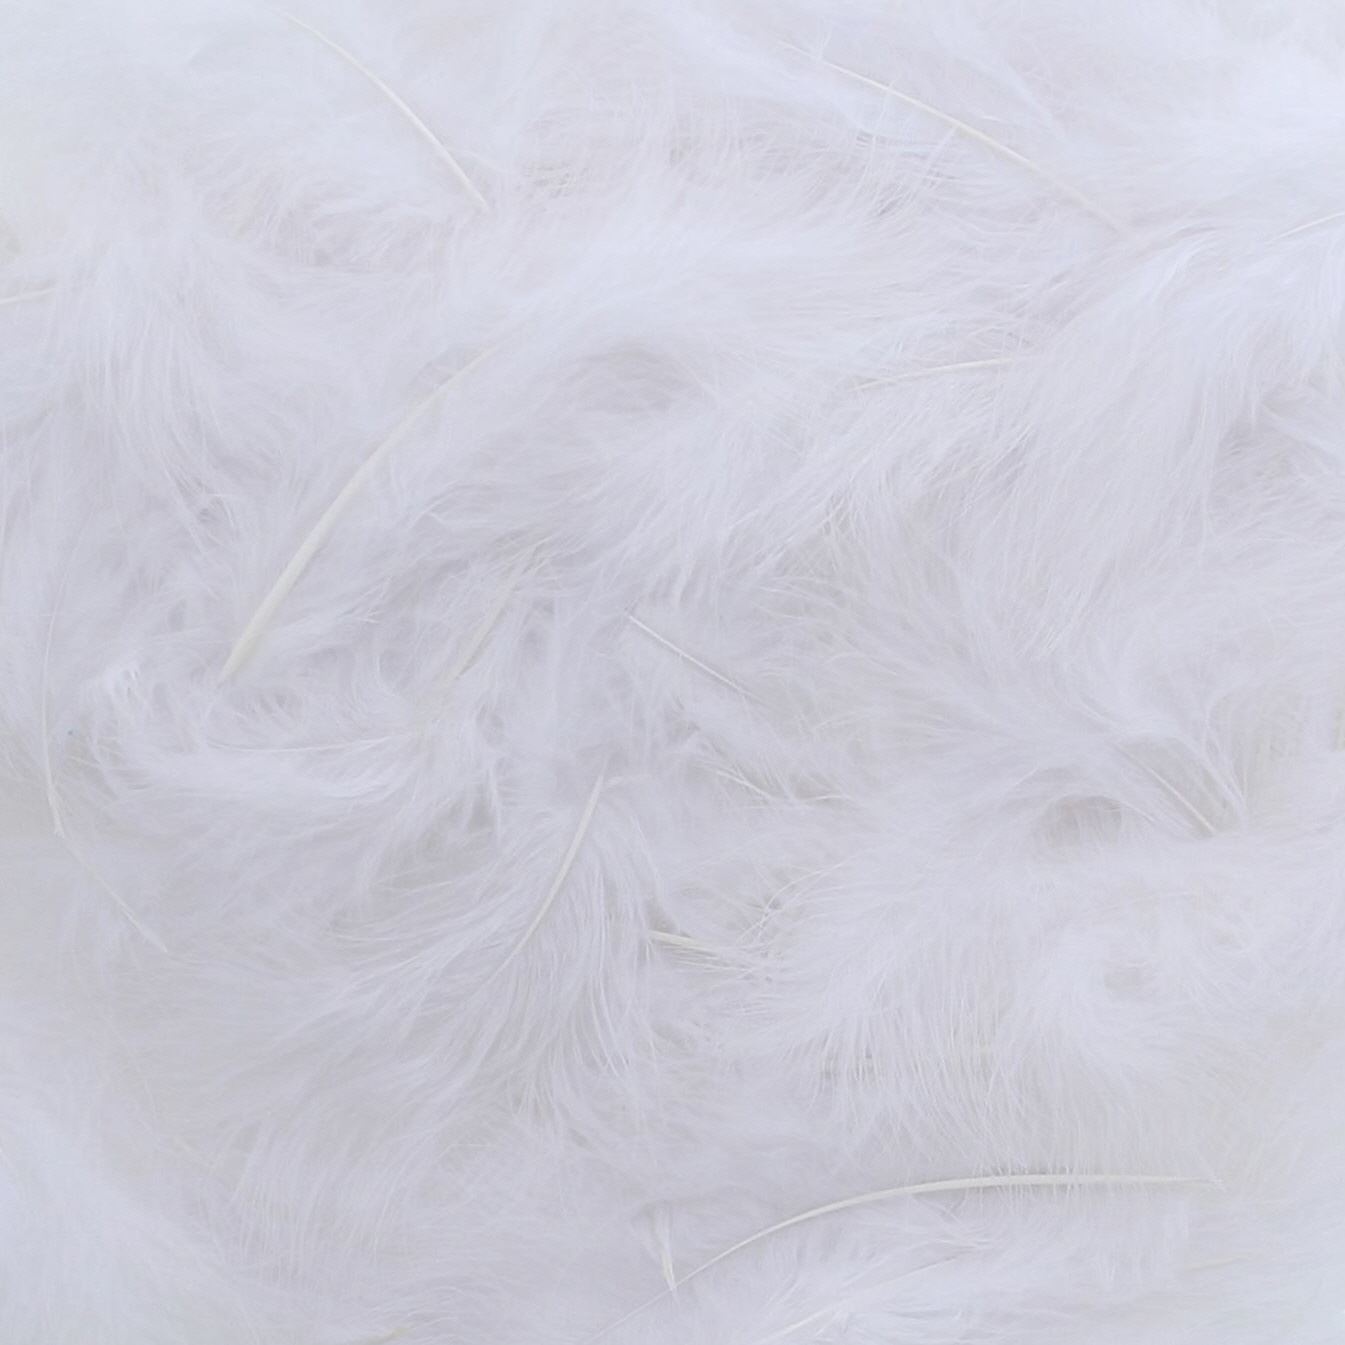 Feathers White - about 400 pieces per bag